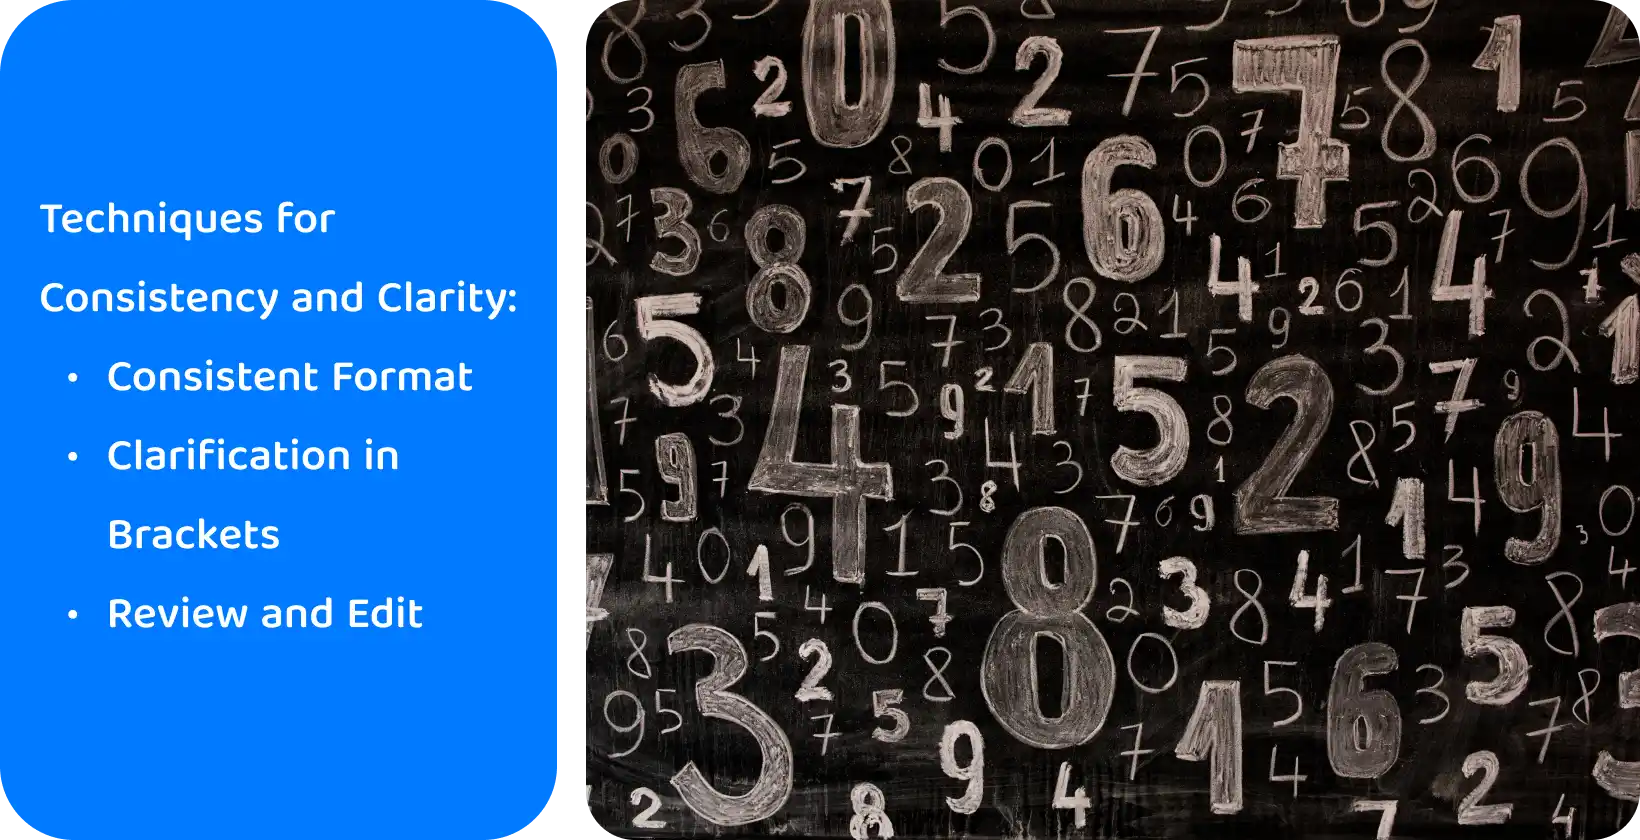 Numbers are written on a blackboard for the purpose of describing number transcription and the importance of clarity.